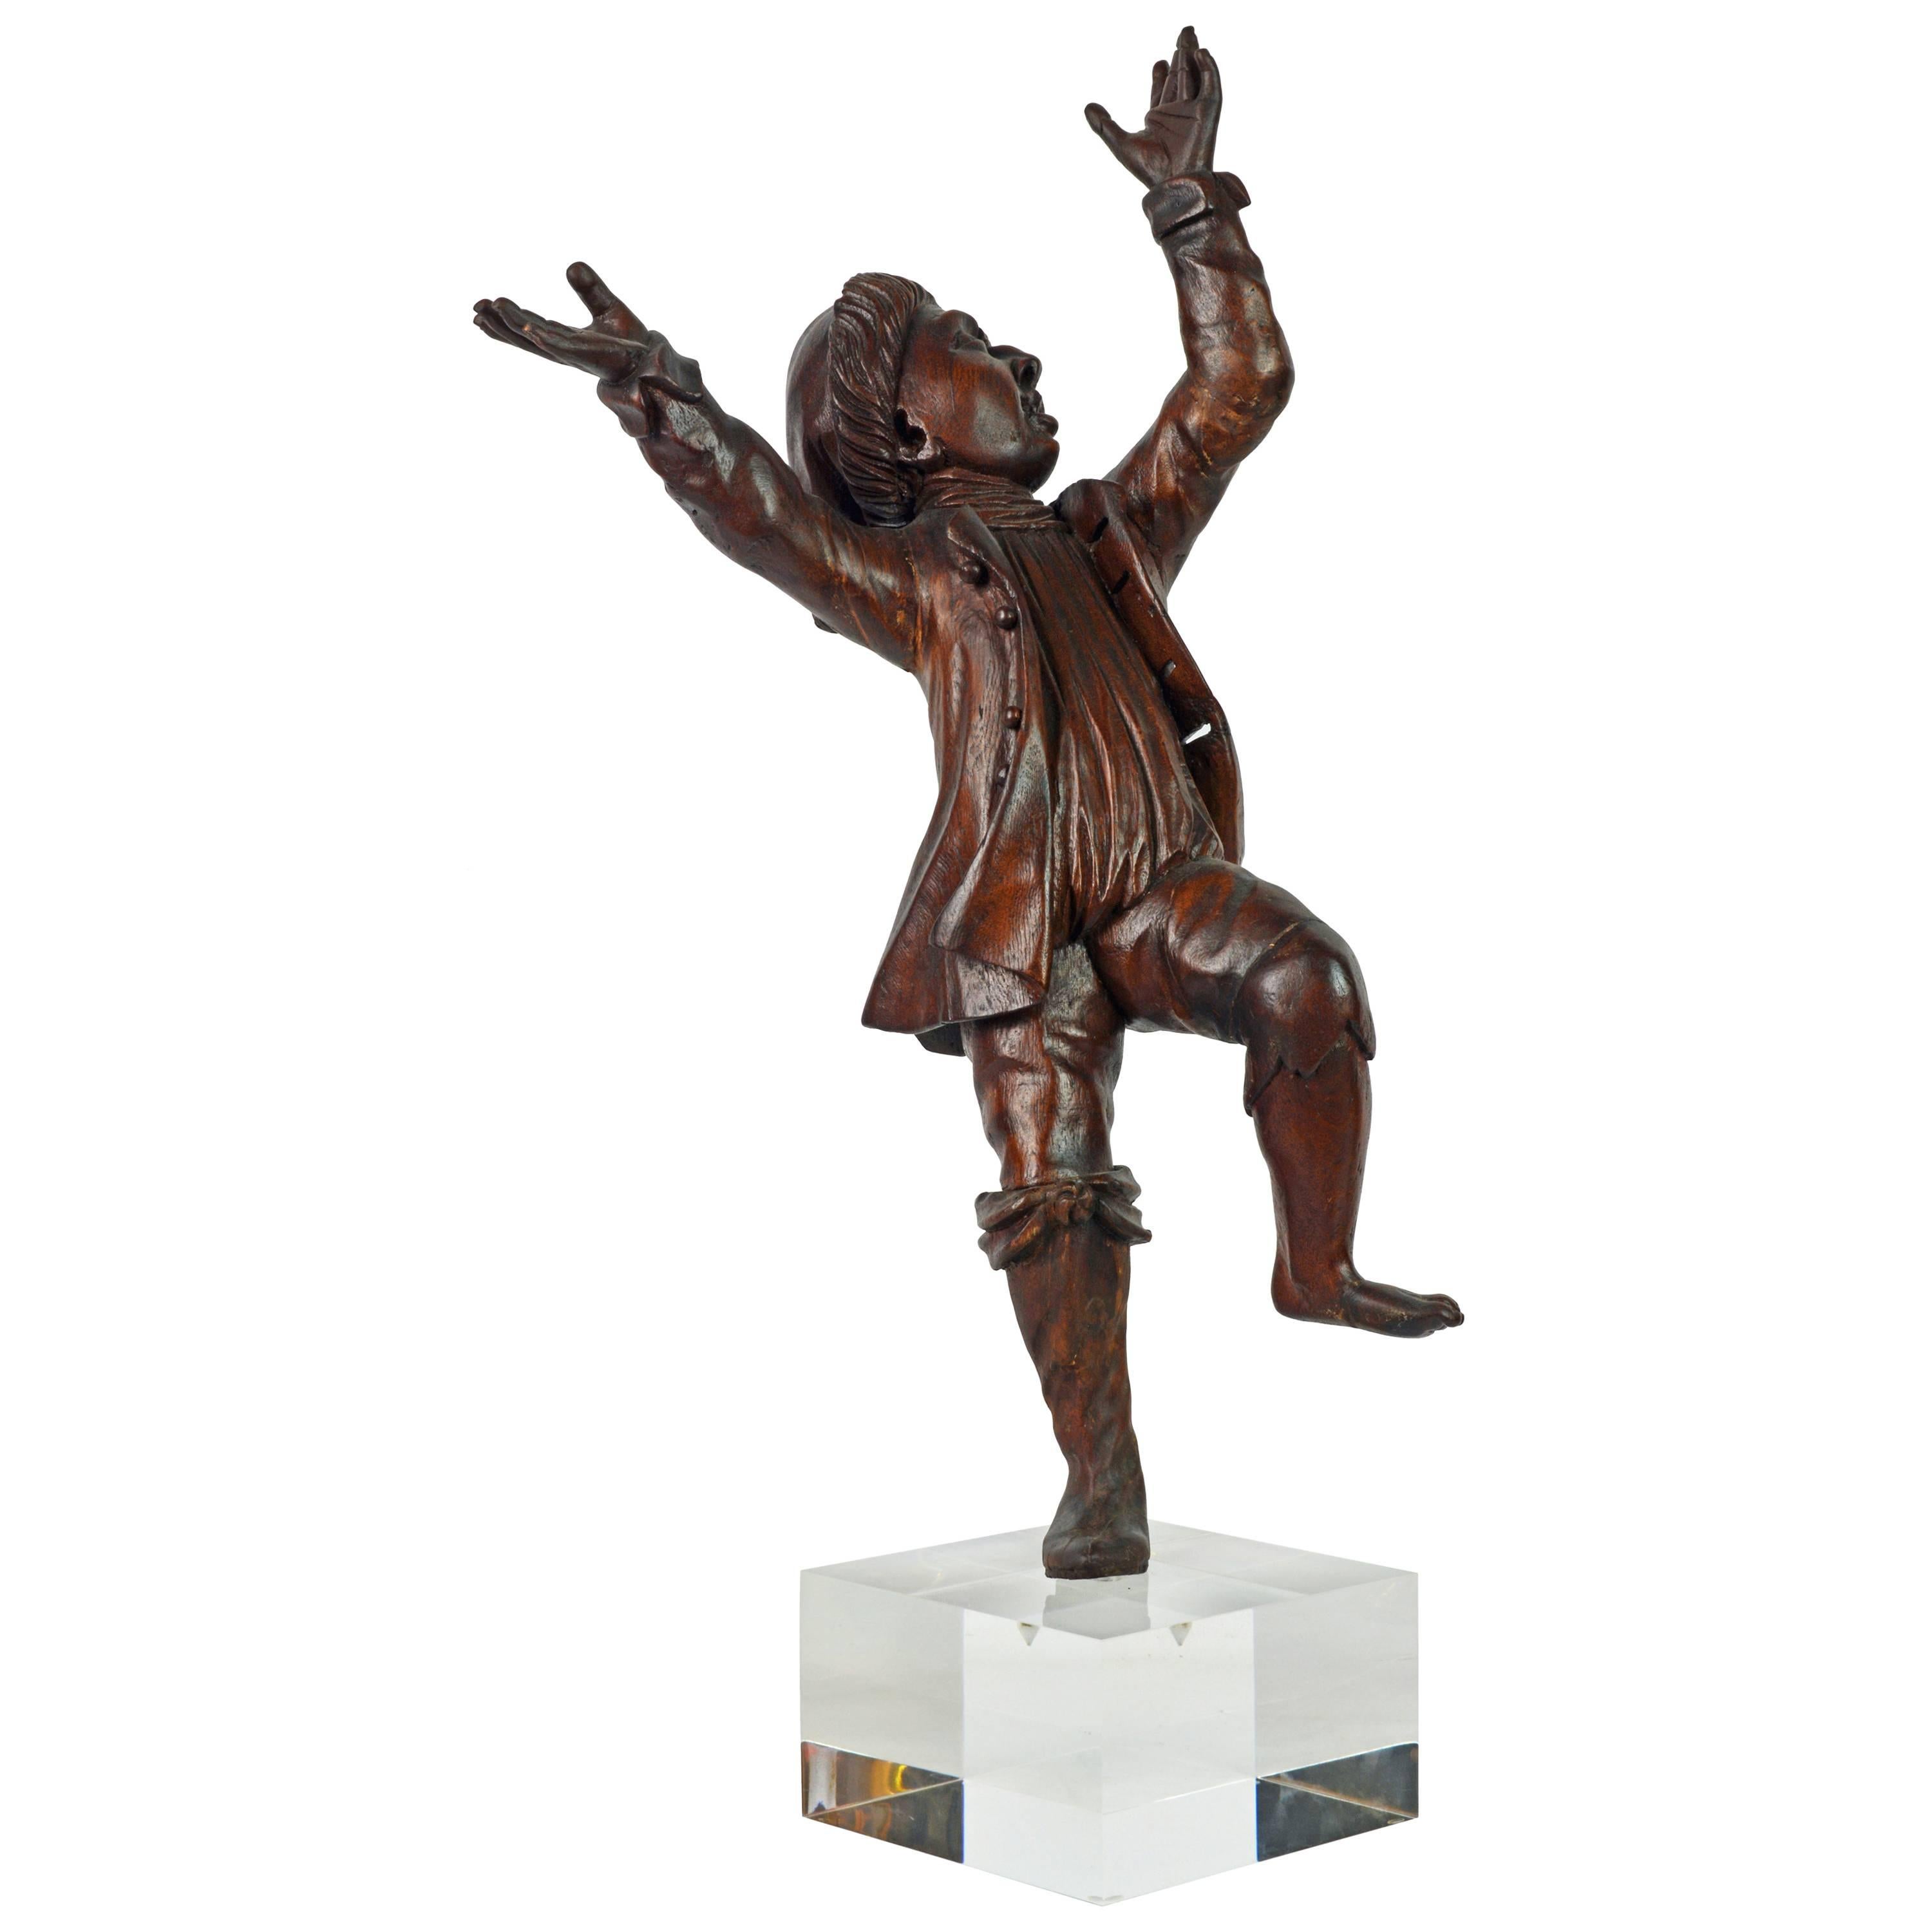 Italian 18th Century Carved Statue of a Dancing Jubilant Boy on a Lucite Base